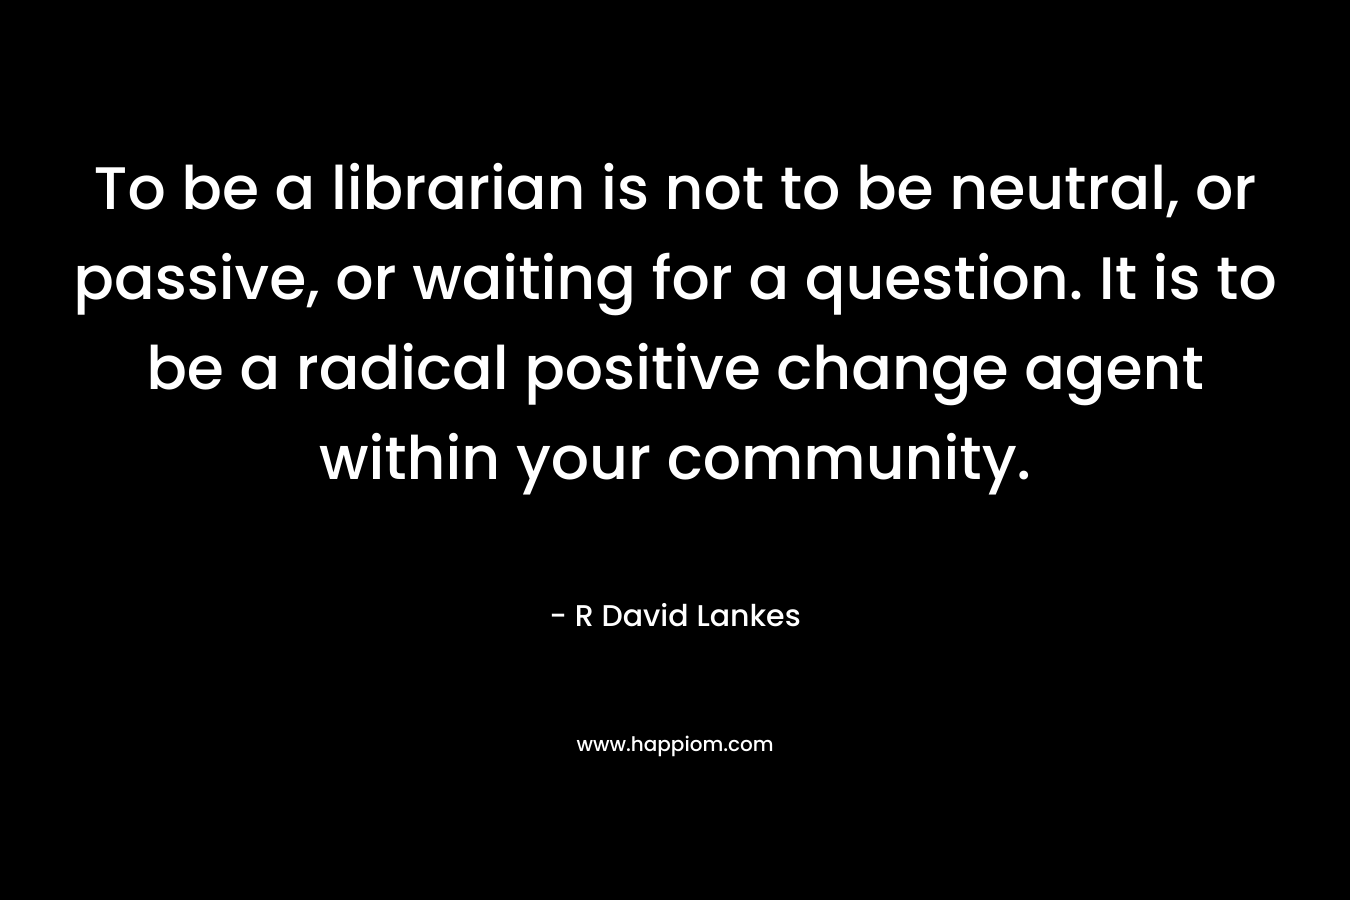 To be a librarian is not to be neutral, or passive, or waiting for a question. It is to be a radical positive change agent within your community.